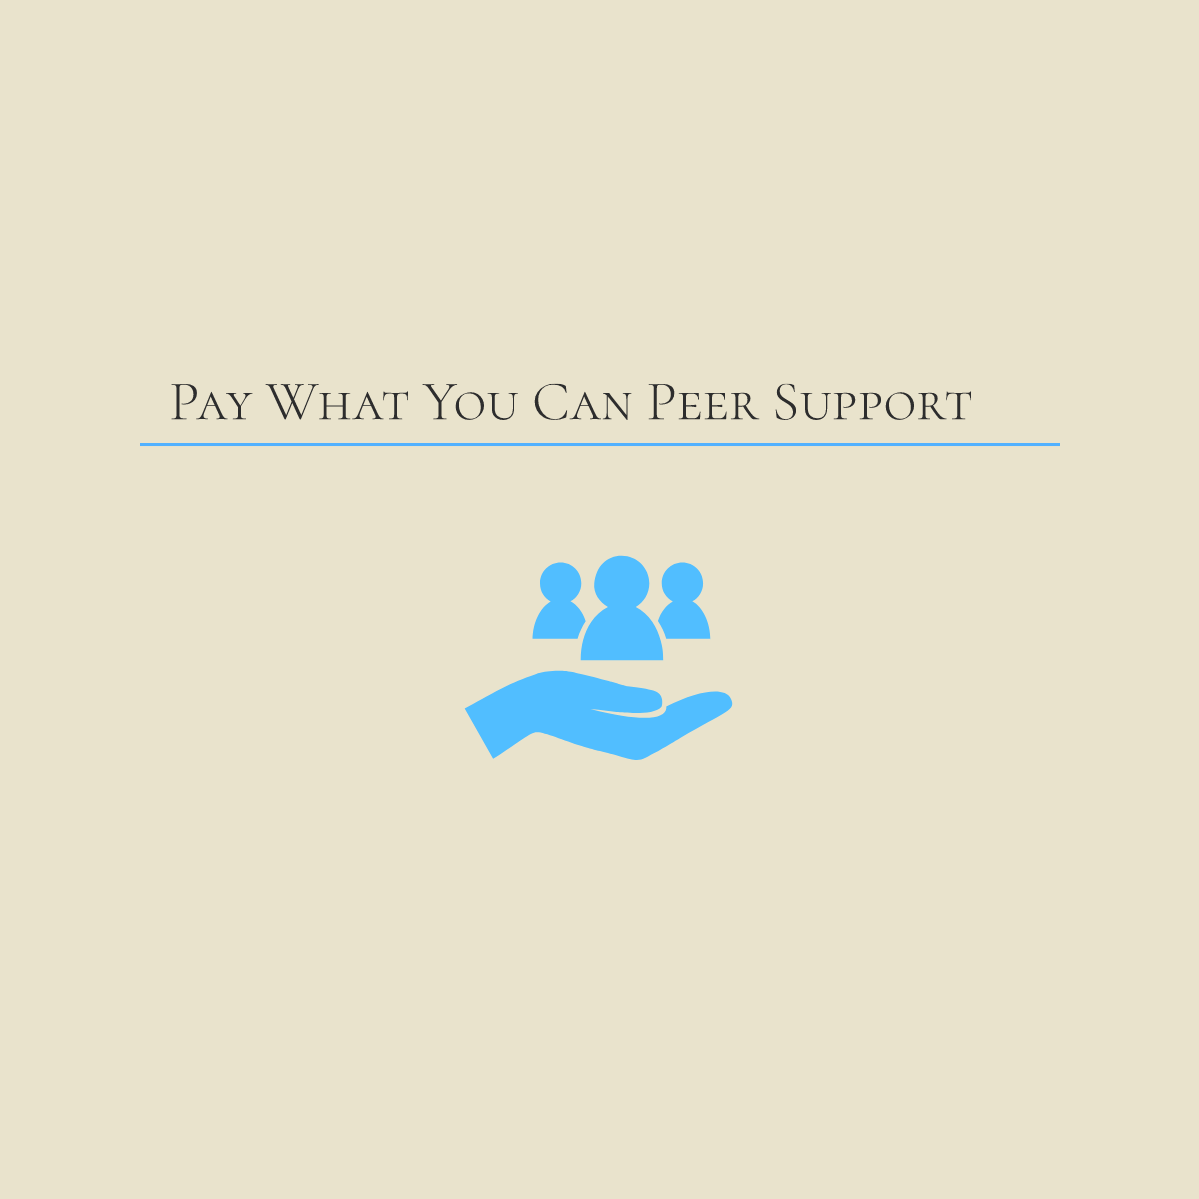 Pay What You Can Peer Support - PWYCPS